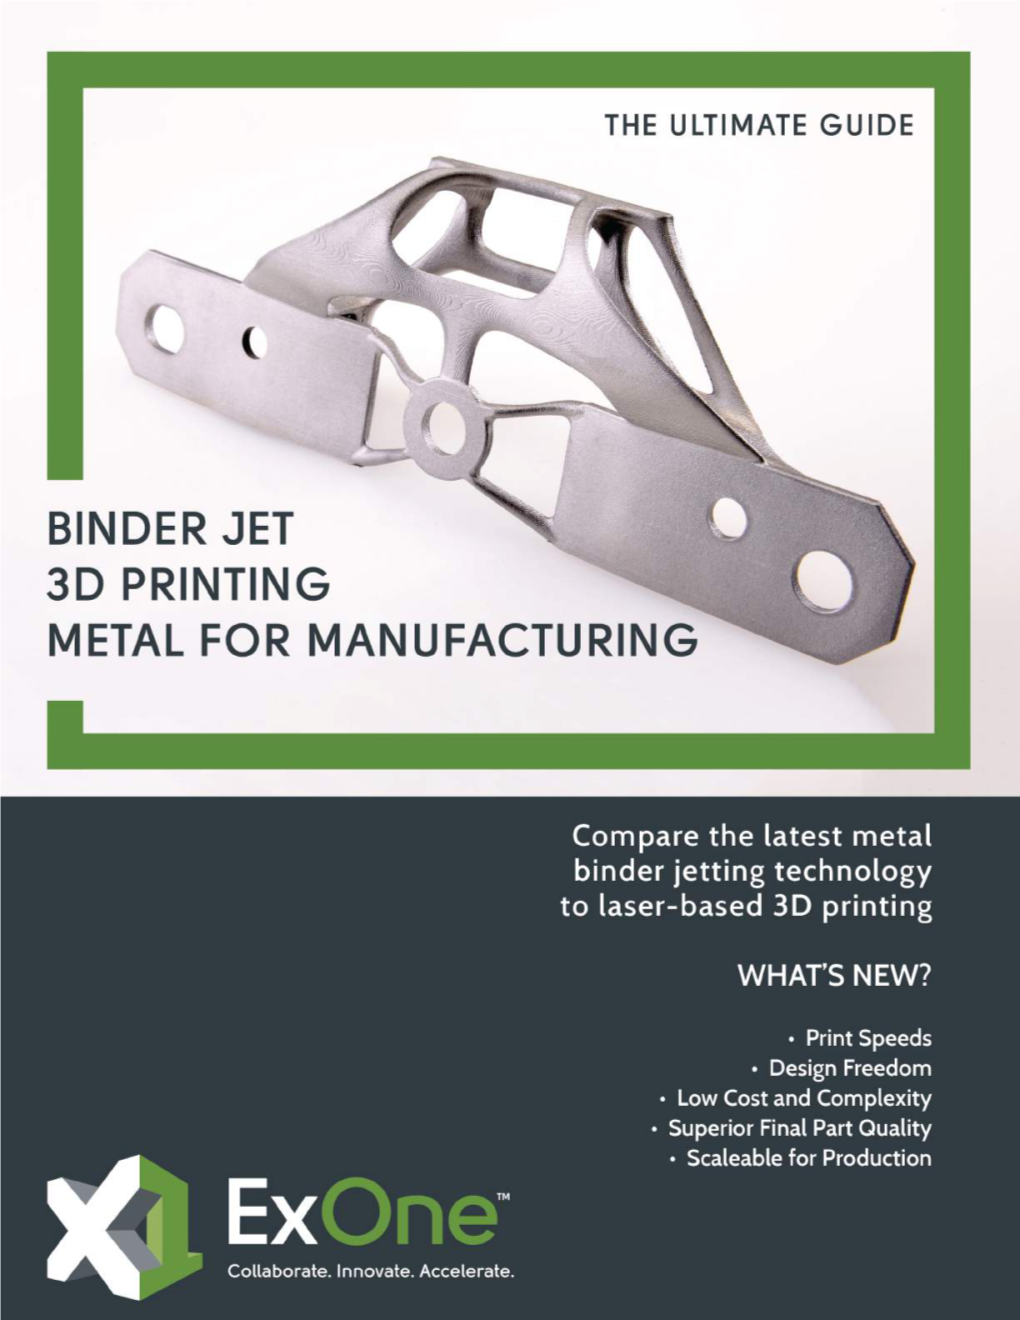 Overview: Metal 3D Printing for Production 6